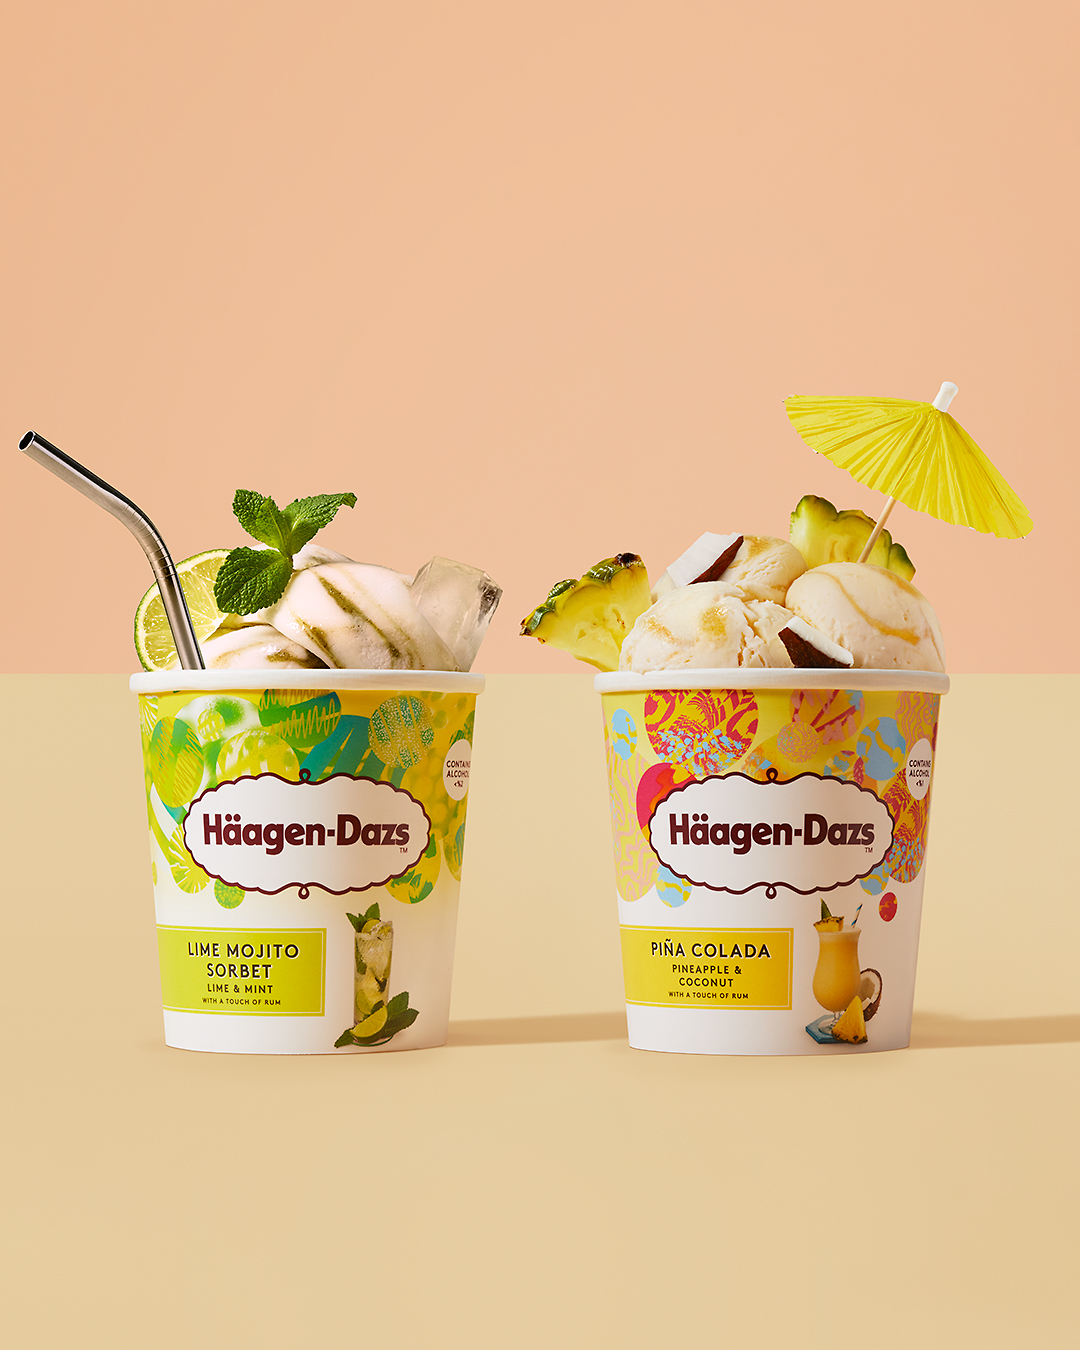 Häagen-Dazs have launched two of the UK’s favourite cocktail flavours into mini ice creams: Piña Colada, and Lime Mojito Sorbet. The vegan Lime Mojito Sorbet is infused with a touch of rum (less than 1% per tub) with a swirl of sweet mint coulis, while the Piña Colada Ice Cream is luxuriously creamy with coconut and pineapple ice cream and a swirl of pineapple rum sauce - perfect for picnics or BBQs. Available exclusively at Co-Op stores nationwide, £4.99 per pack.